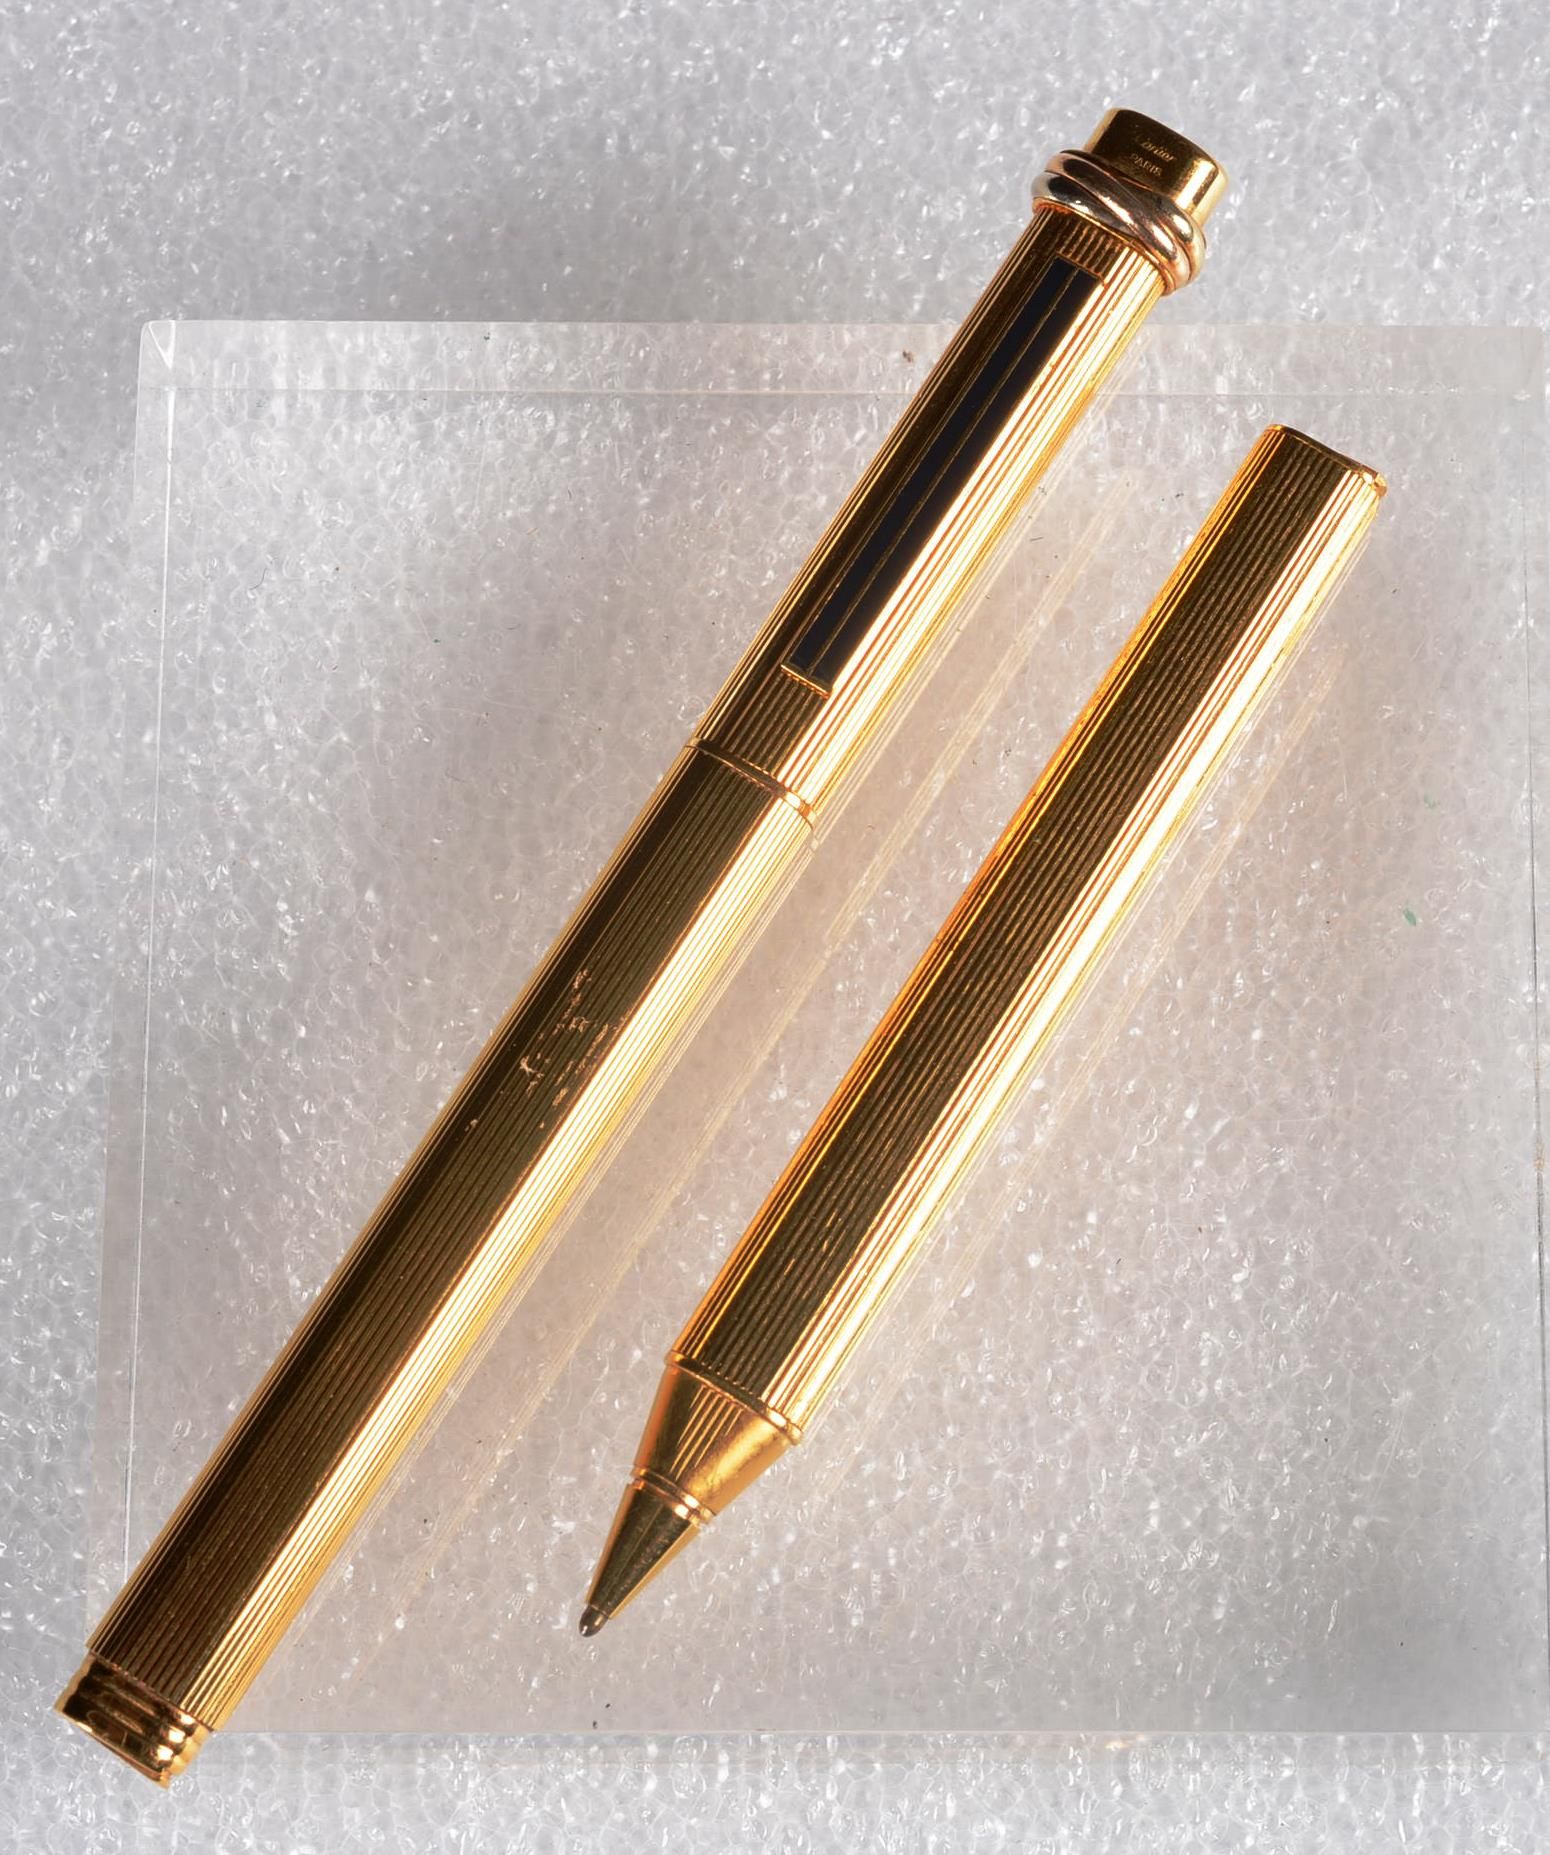 STYLO CARTIER TRINITY CARTIER.

Cartier trinity gold plated pen.

A Trinity with&hellip;